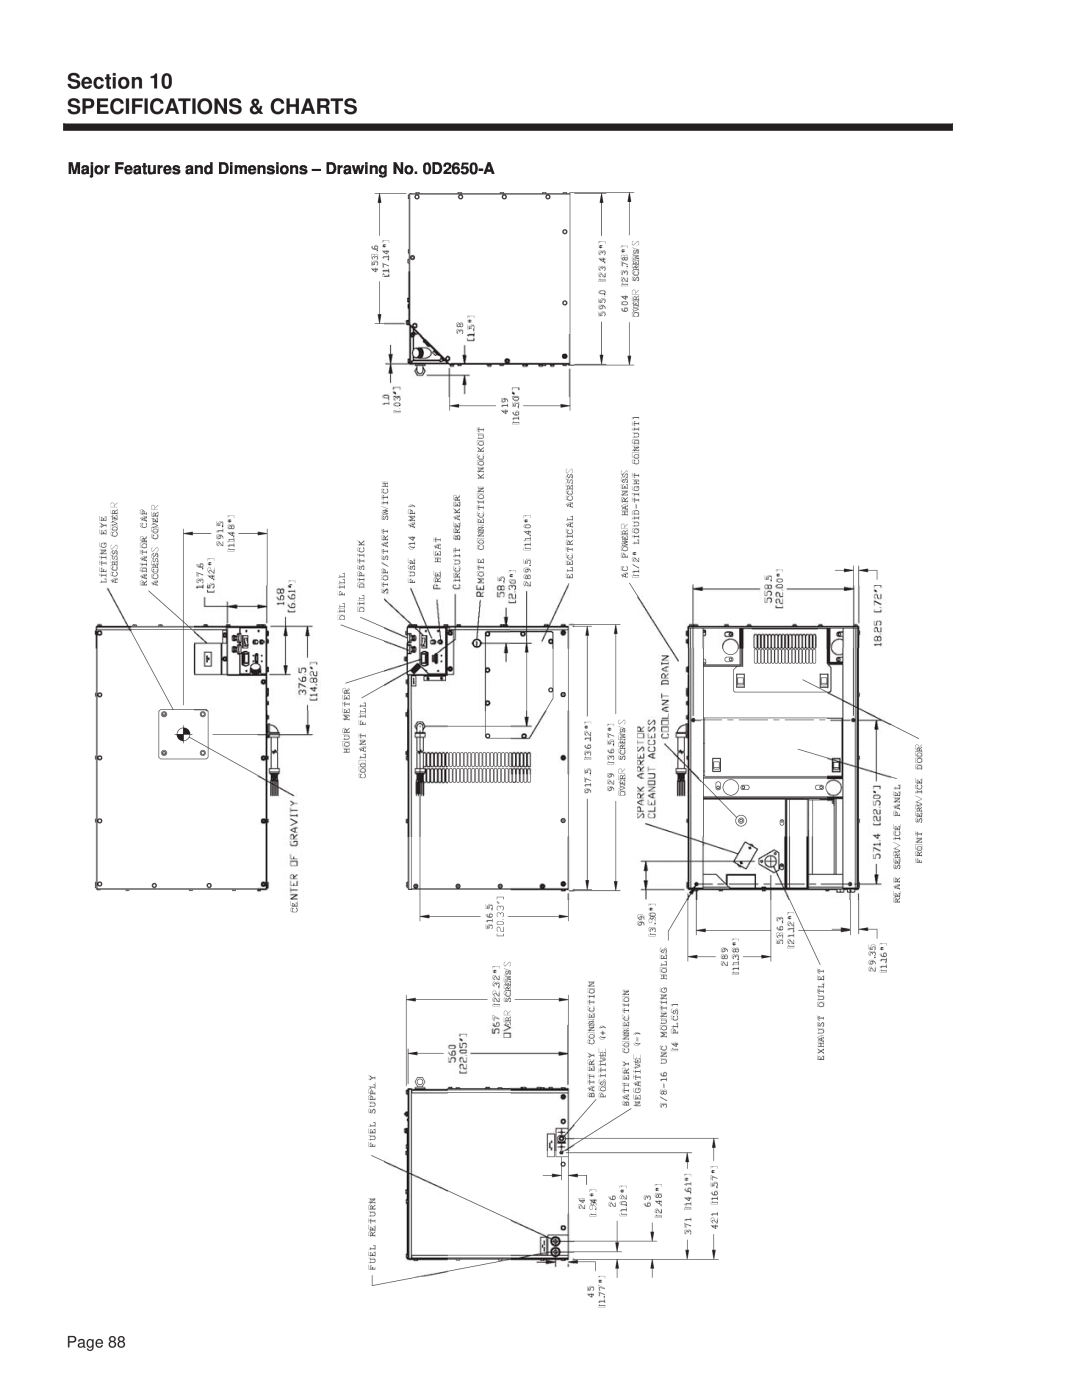 Guardian Technologies 4270 Charts, Specifications, Section, Page, Major Features and Dimensions - Drawing No. 0D2650-A 